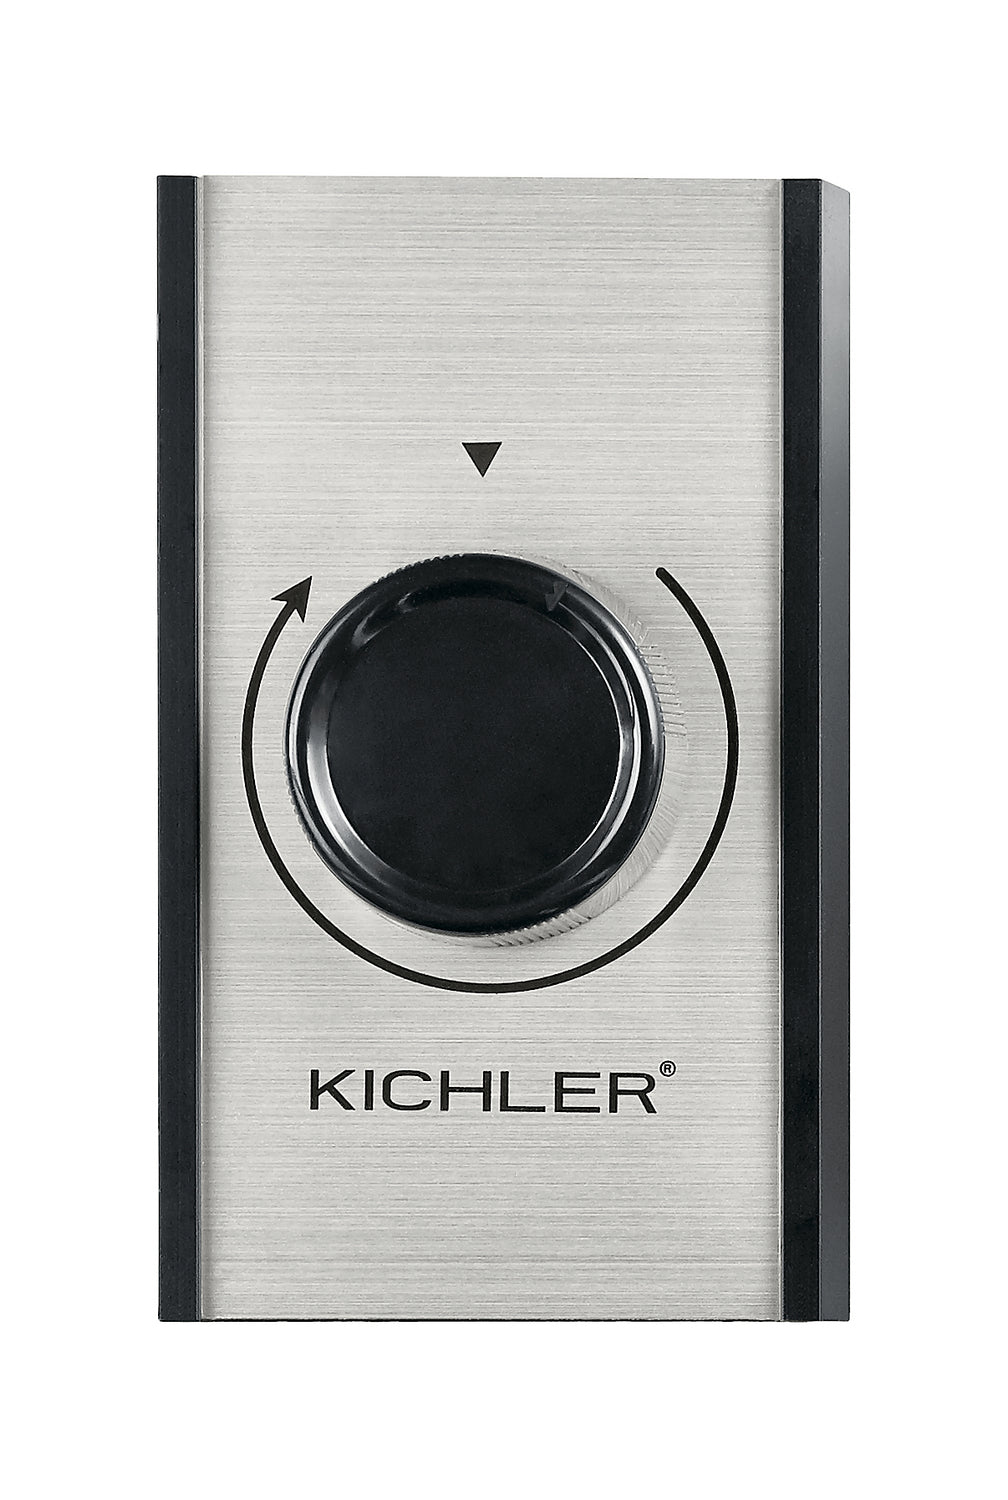 Kichler Canada - 4 Speed Rotary Switch 10 AMP - Accessory - Silver Various- Union Lighting Luminaires Decor